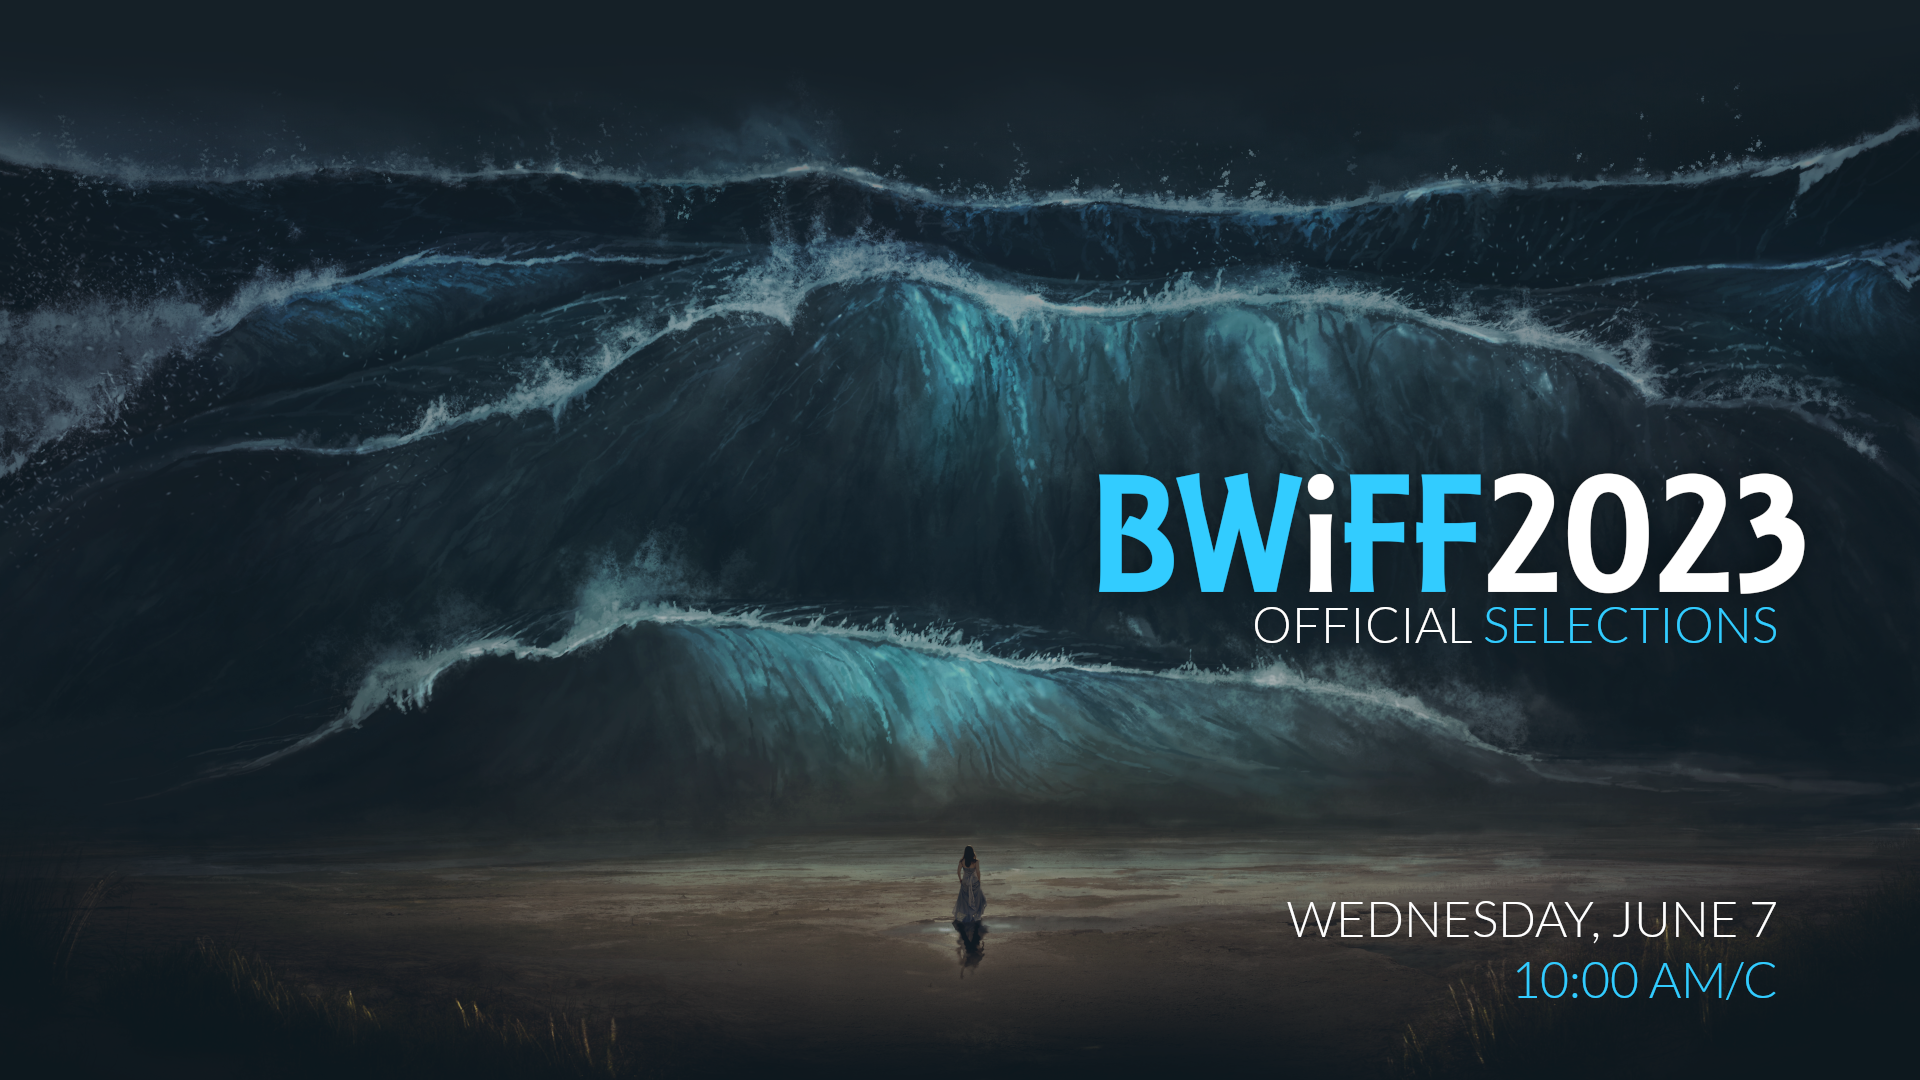 BWiFF 2023 Official Selections - Wednesday, June 7 at 10am/c